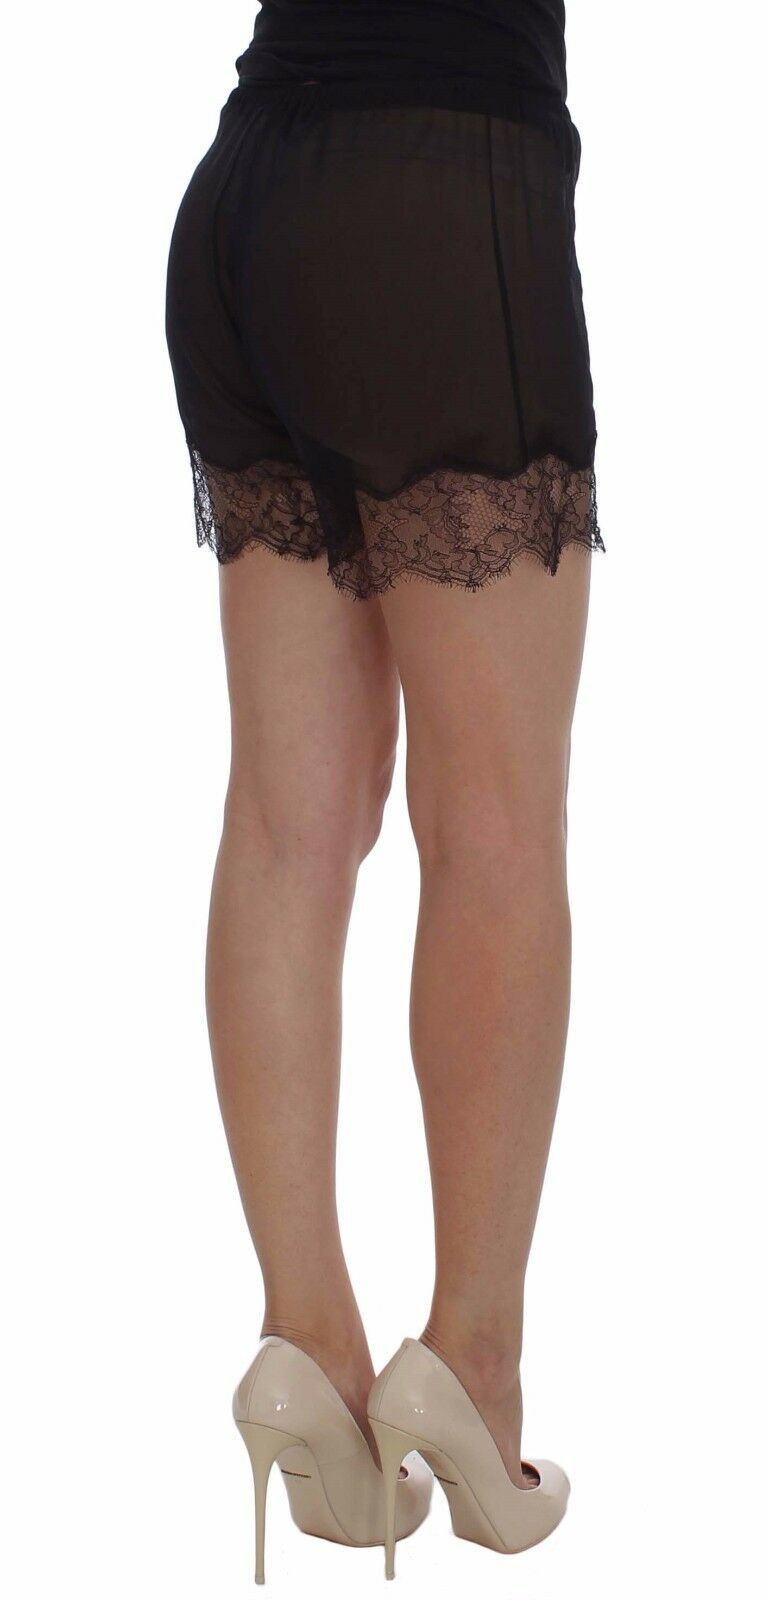 Black Floral Lace Silk Sleepwear Shorts - Designed by Dolce & Gabbana Available to Buy at a Discounted Price on Moon Behind The Hill Online Designer Discount Store